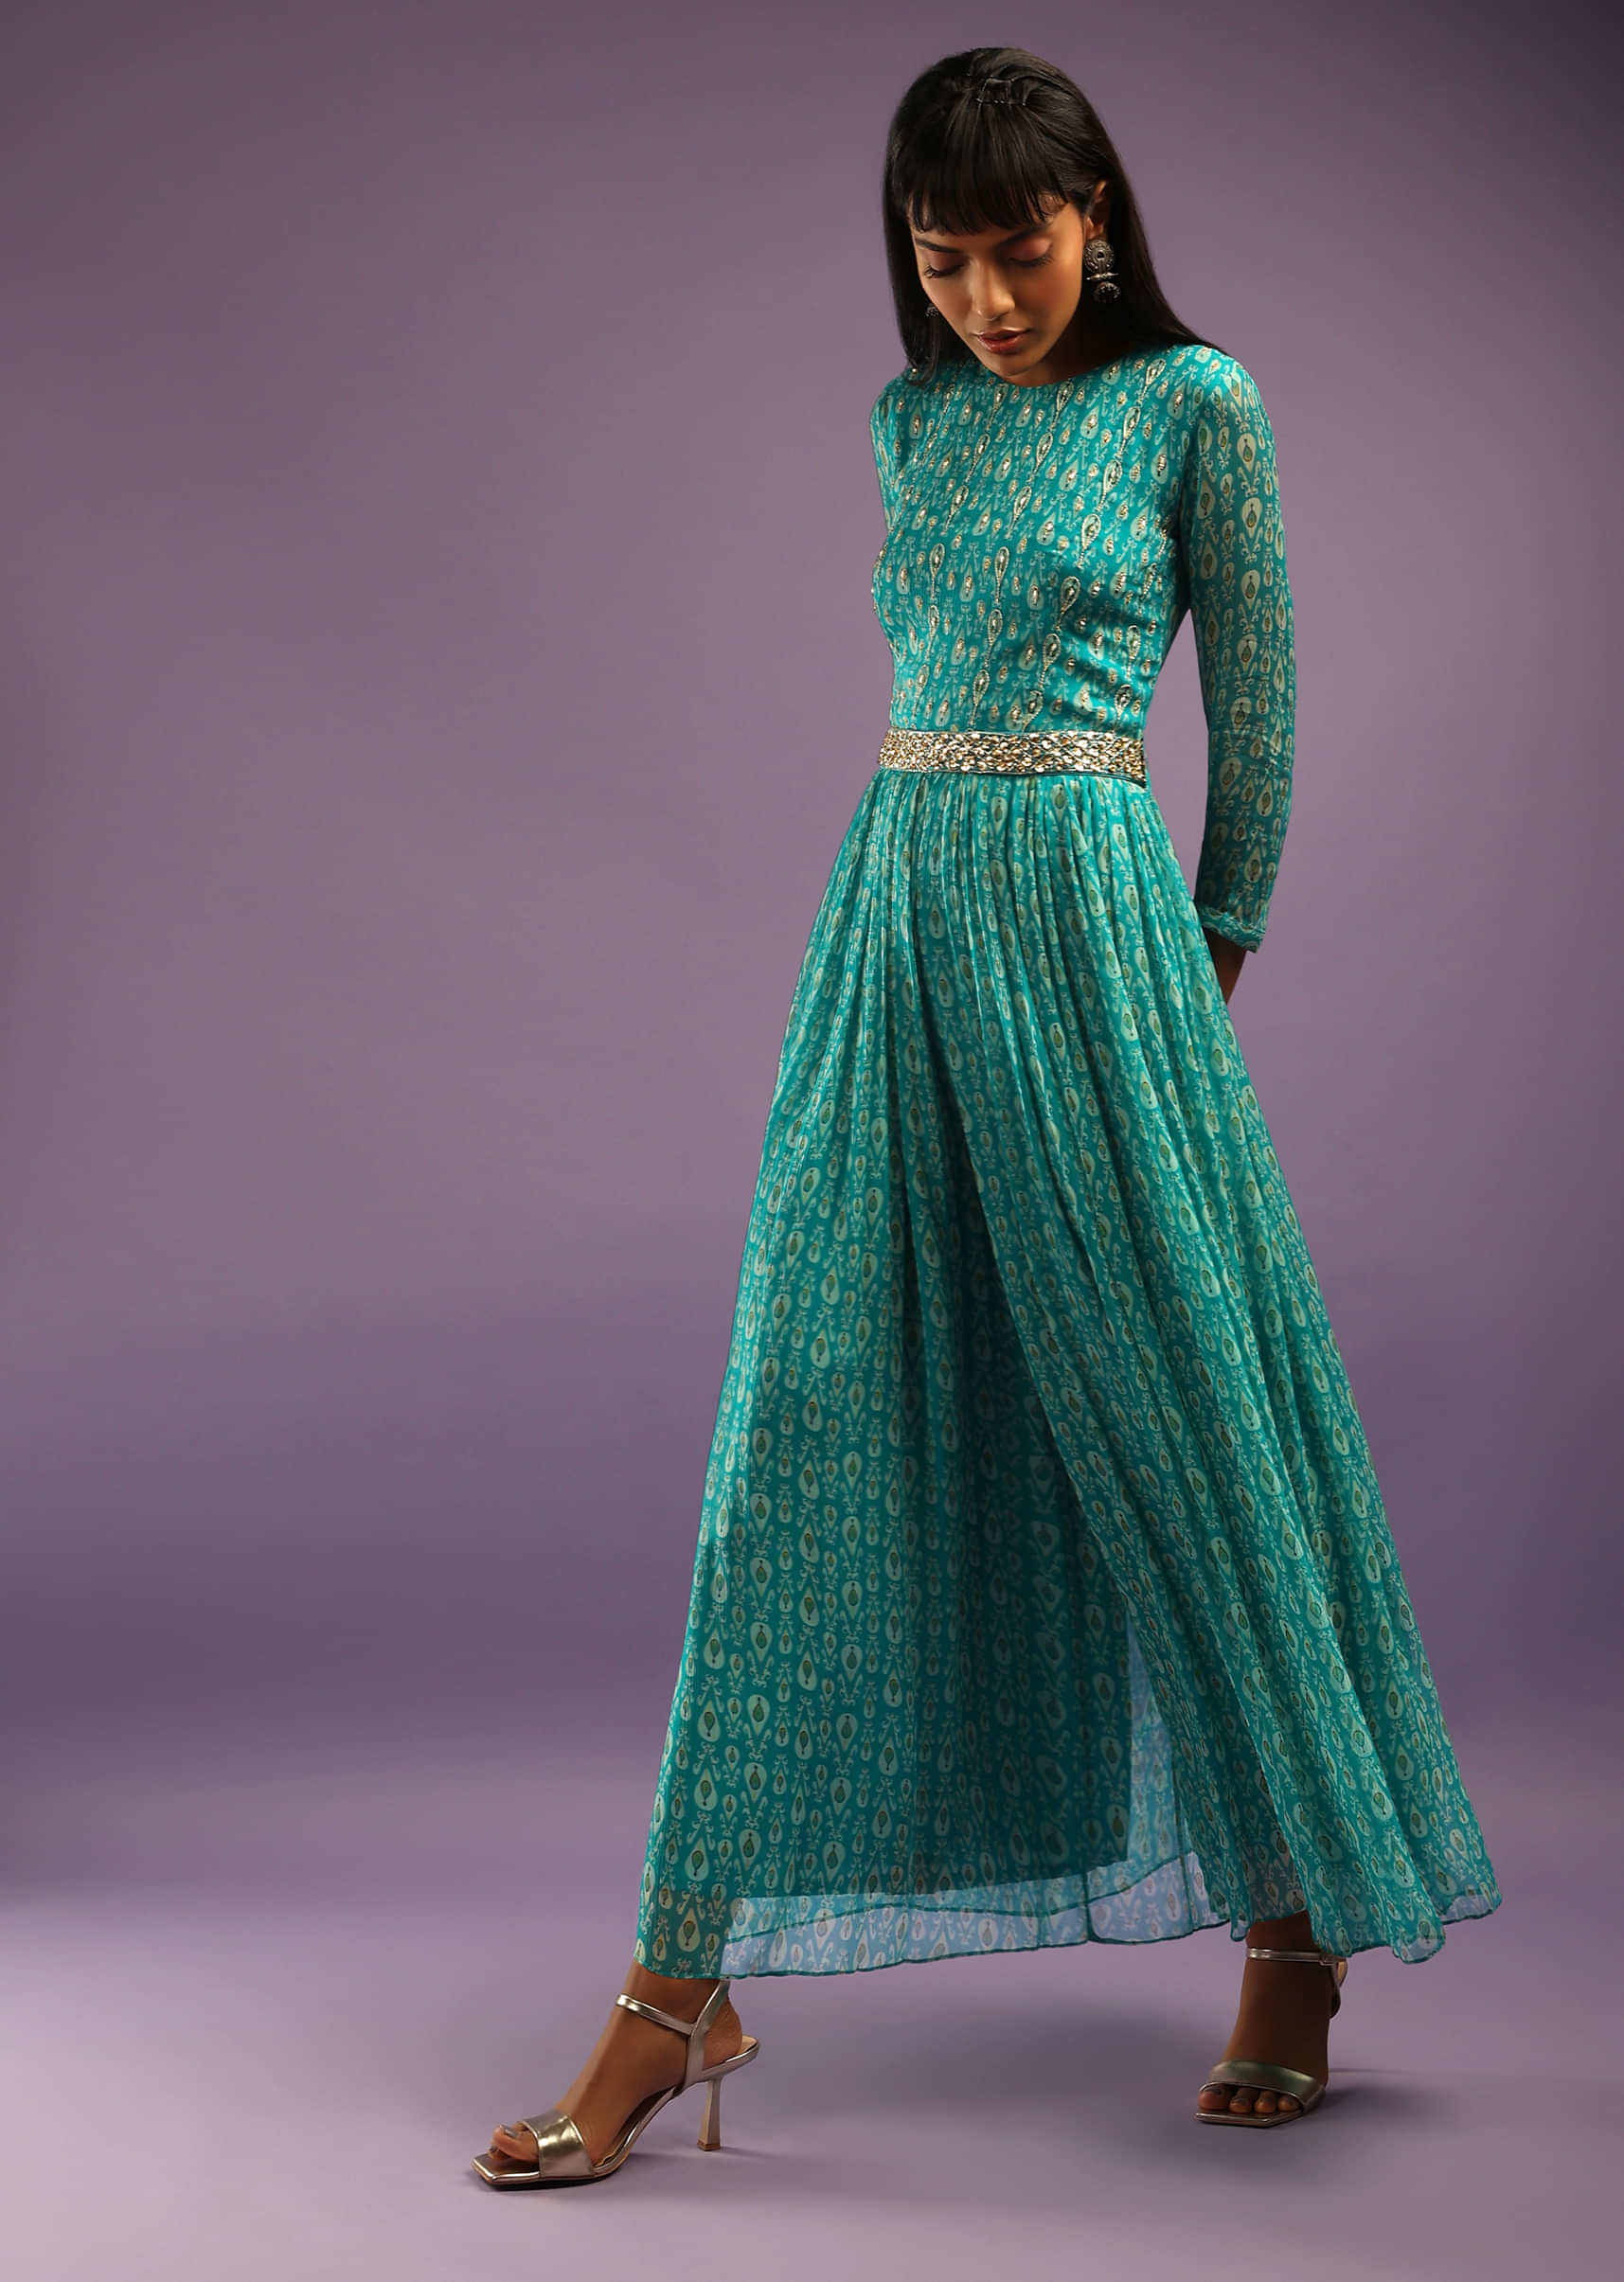 Turquoise Jumpsuit In Georgette With All Over Print And Zari Highlights On The Bodice  